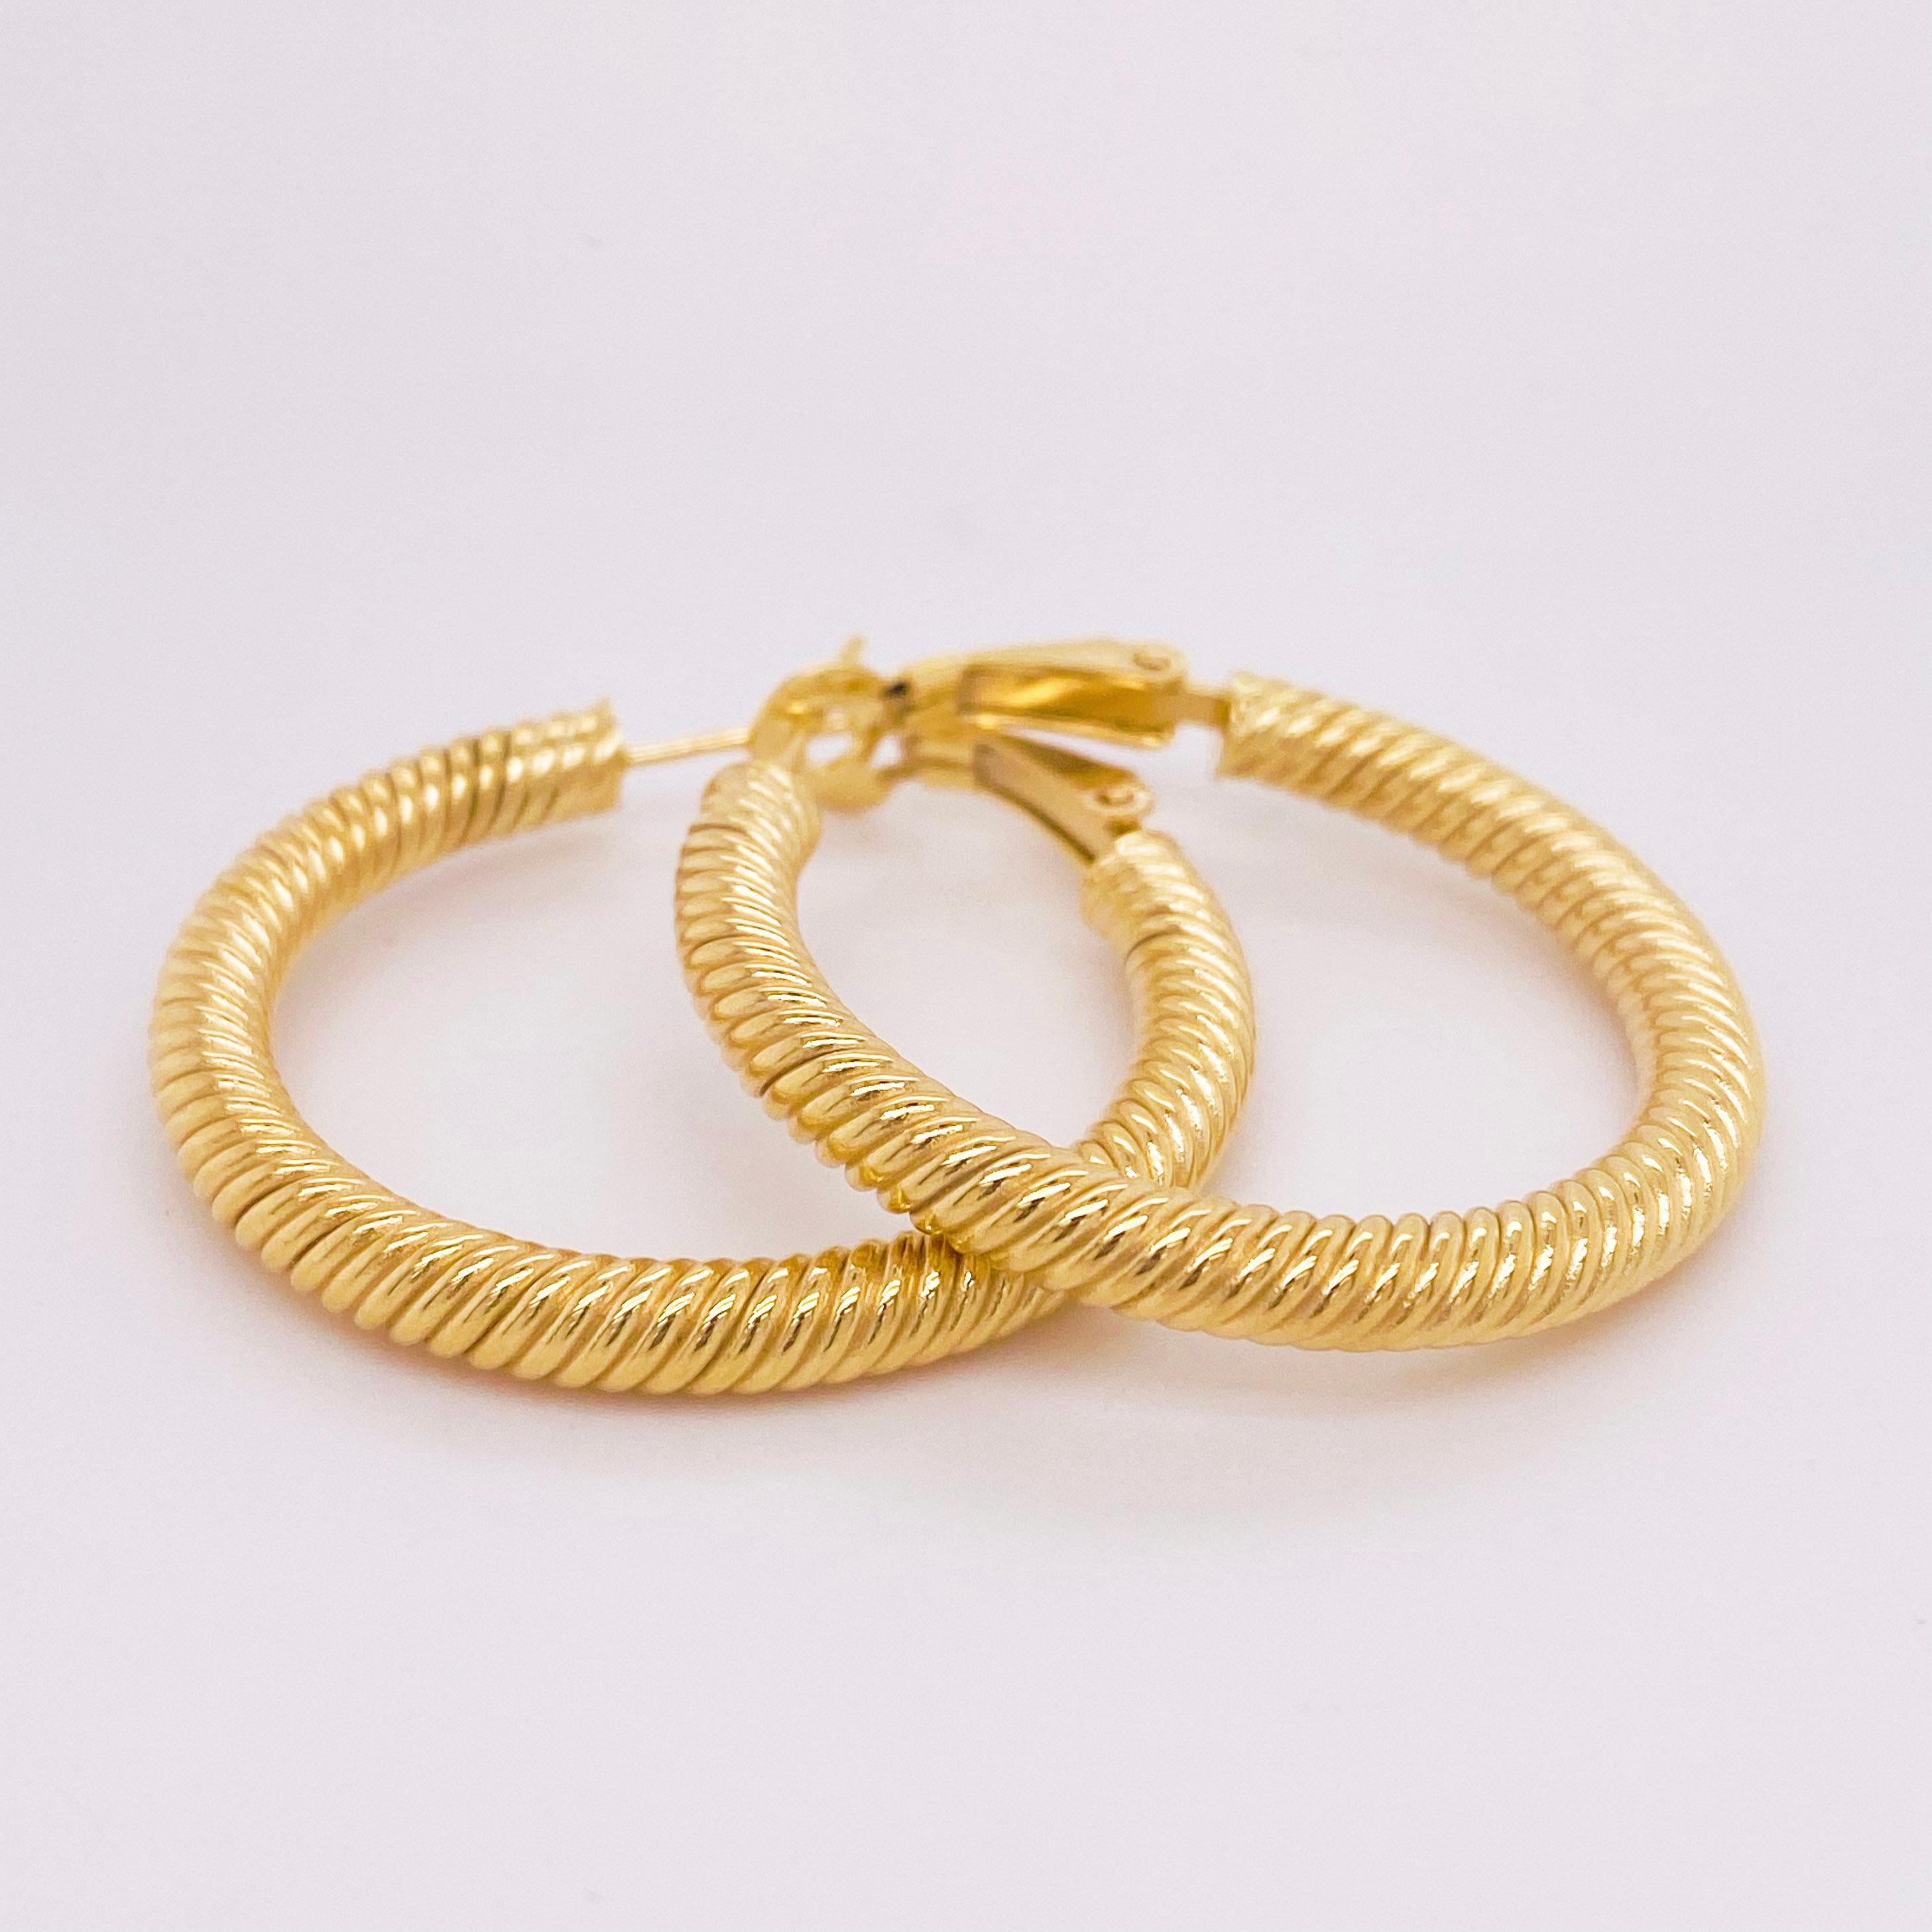 twisted gold hoops